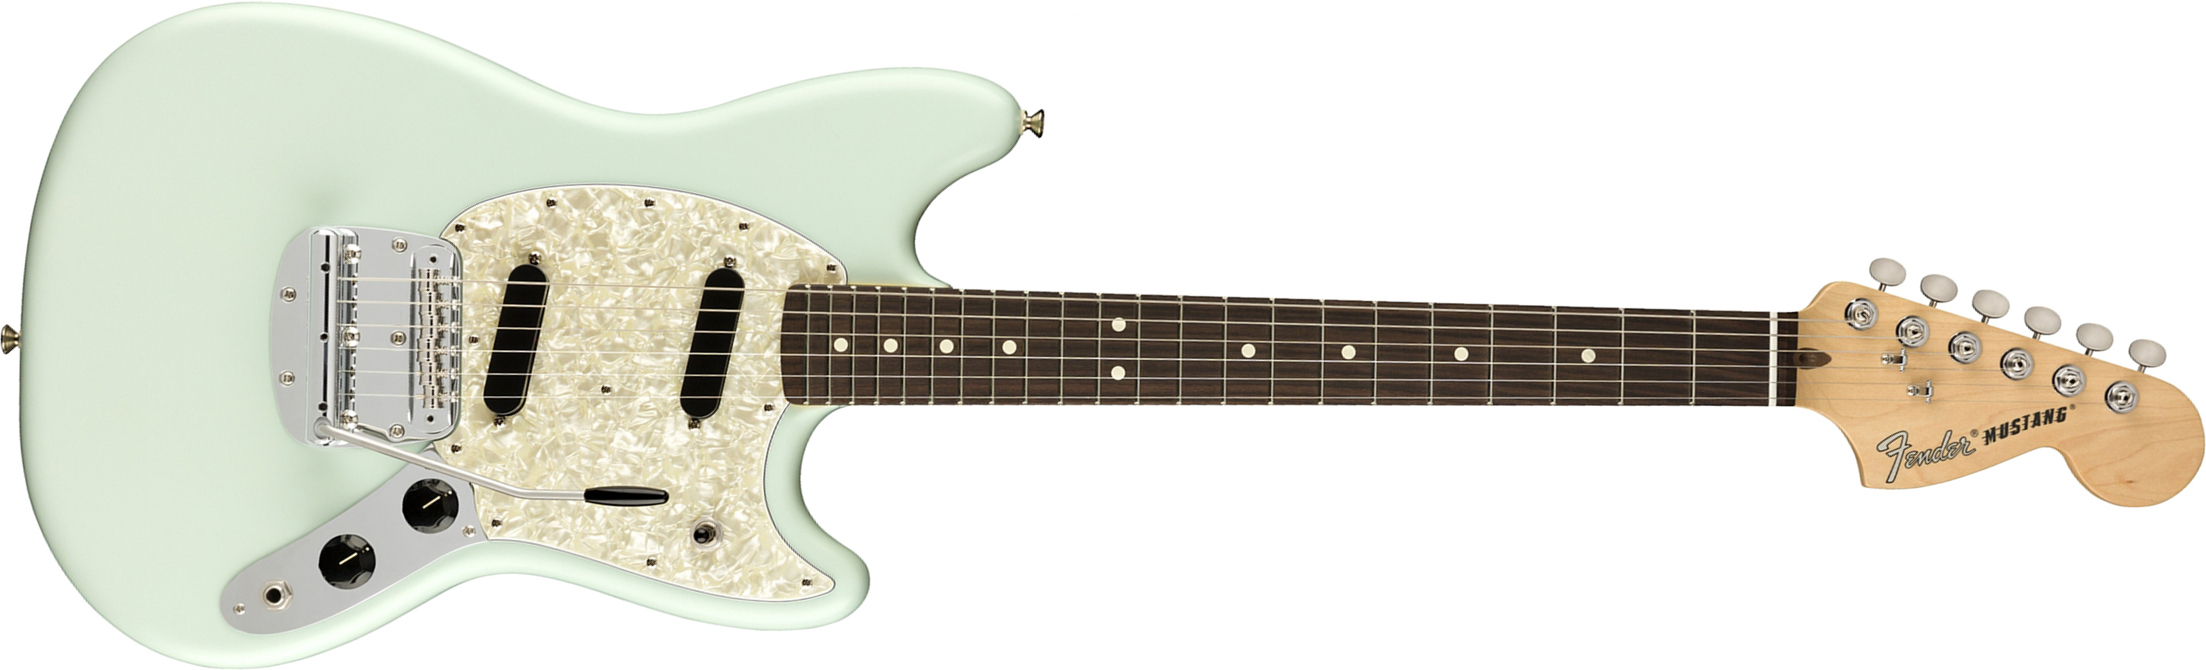 Fender Mustang American Performer Usa Ss Rw - Satin Sonic Blue - Double cut electric guitar - Main picture